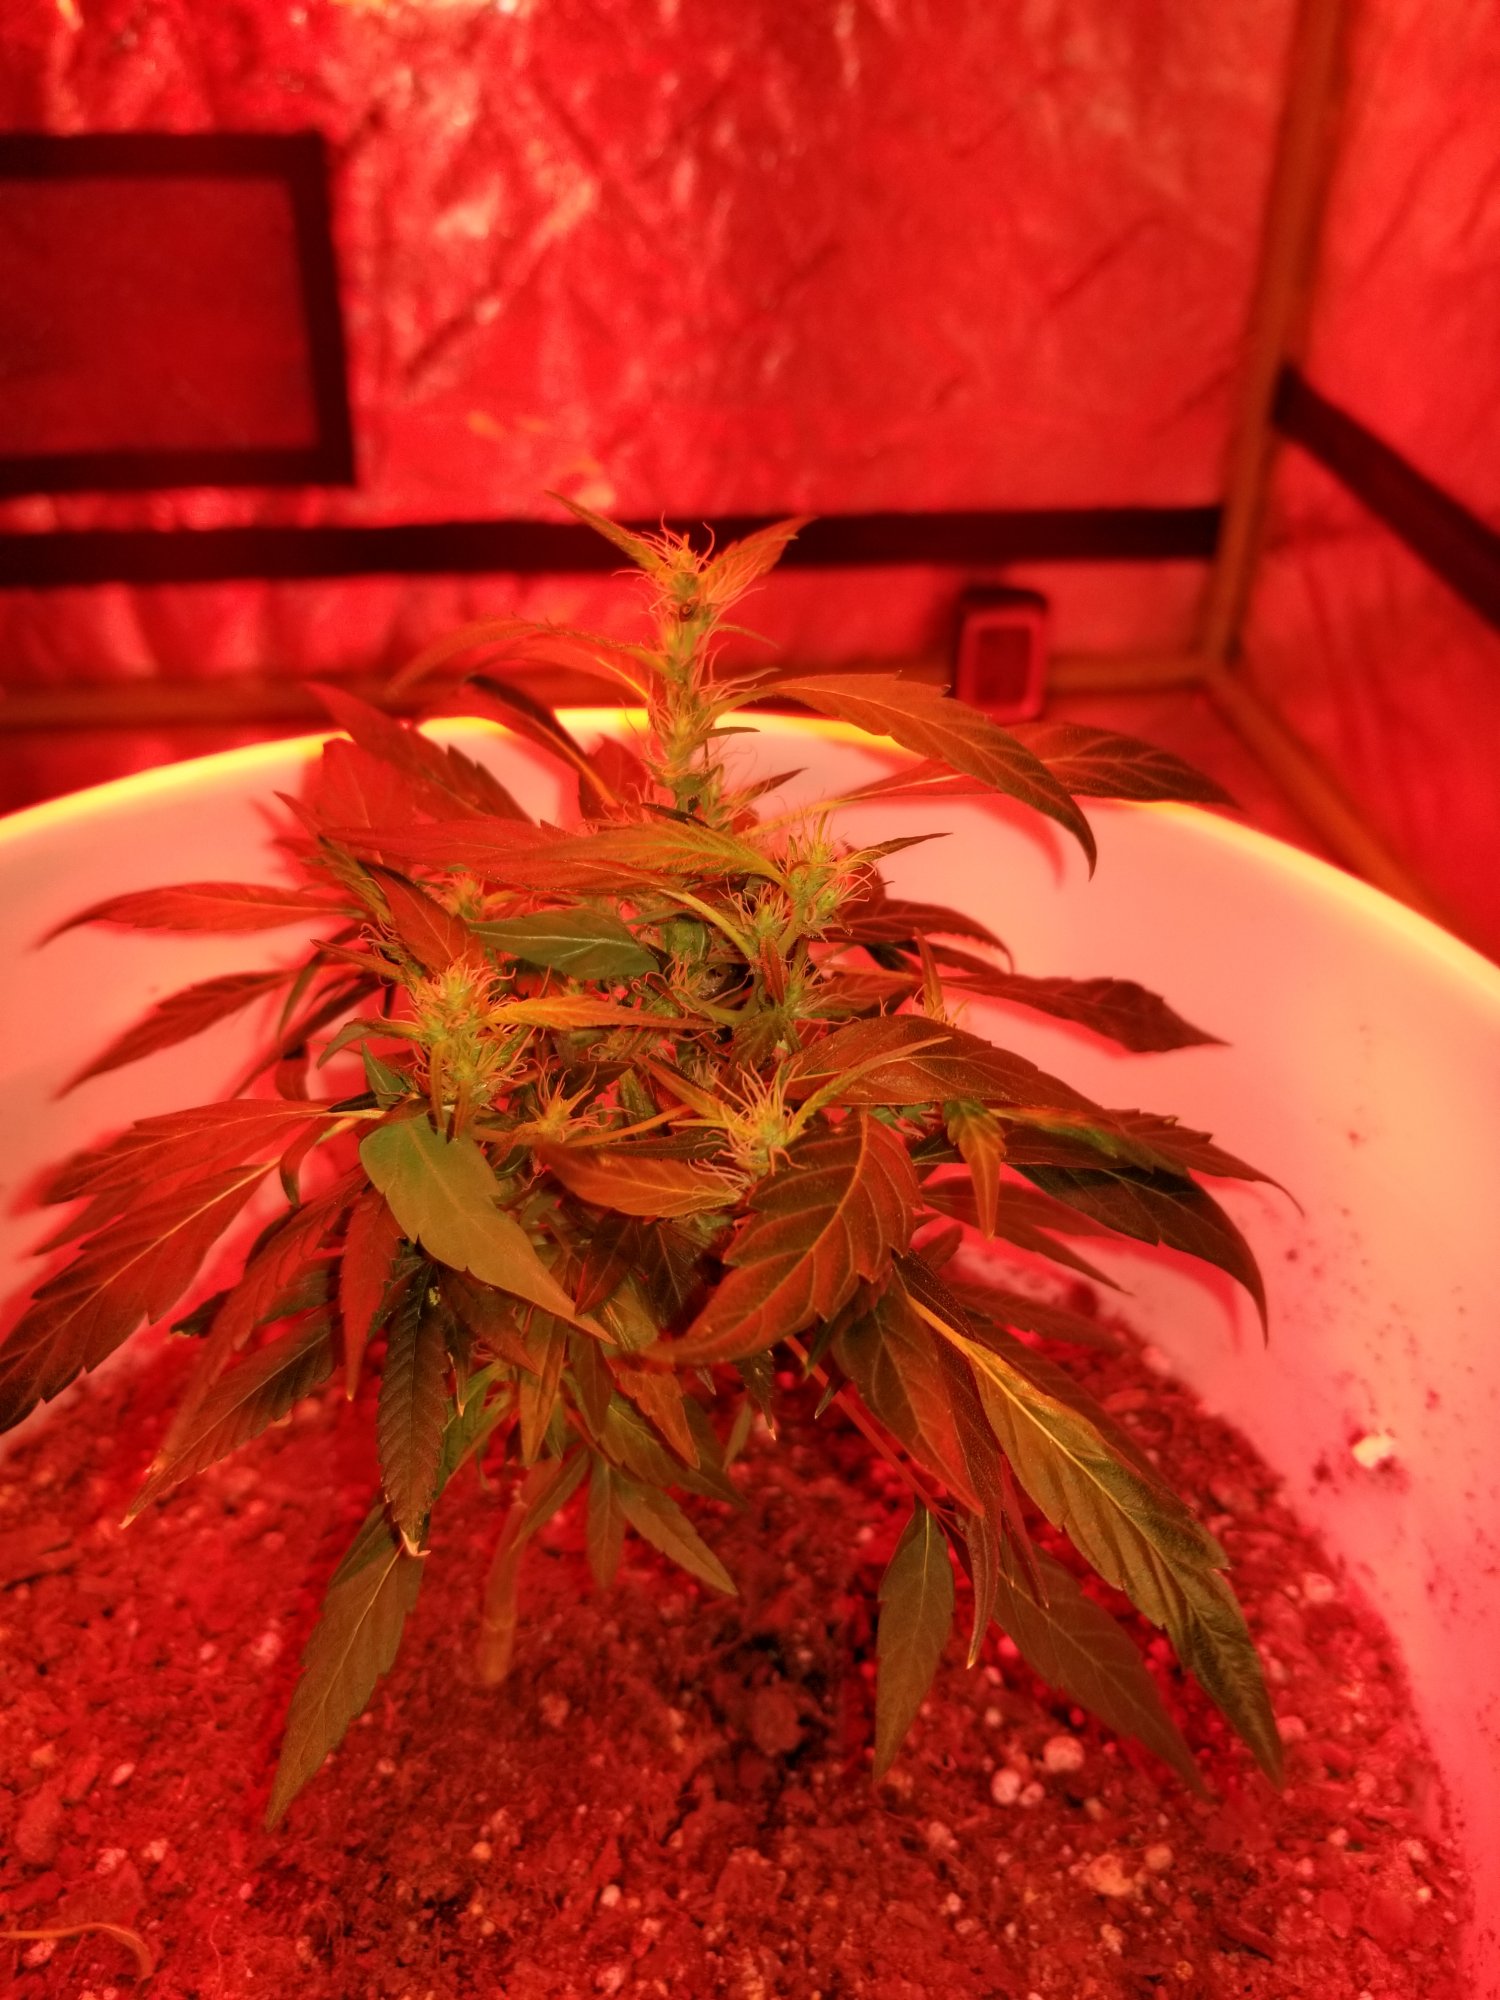 Clone is now showing flowers